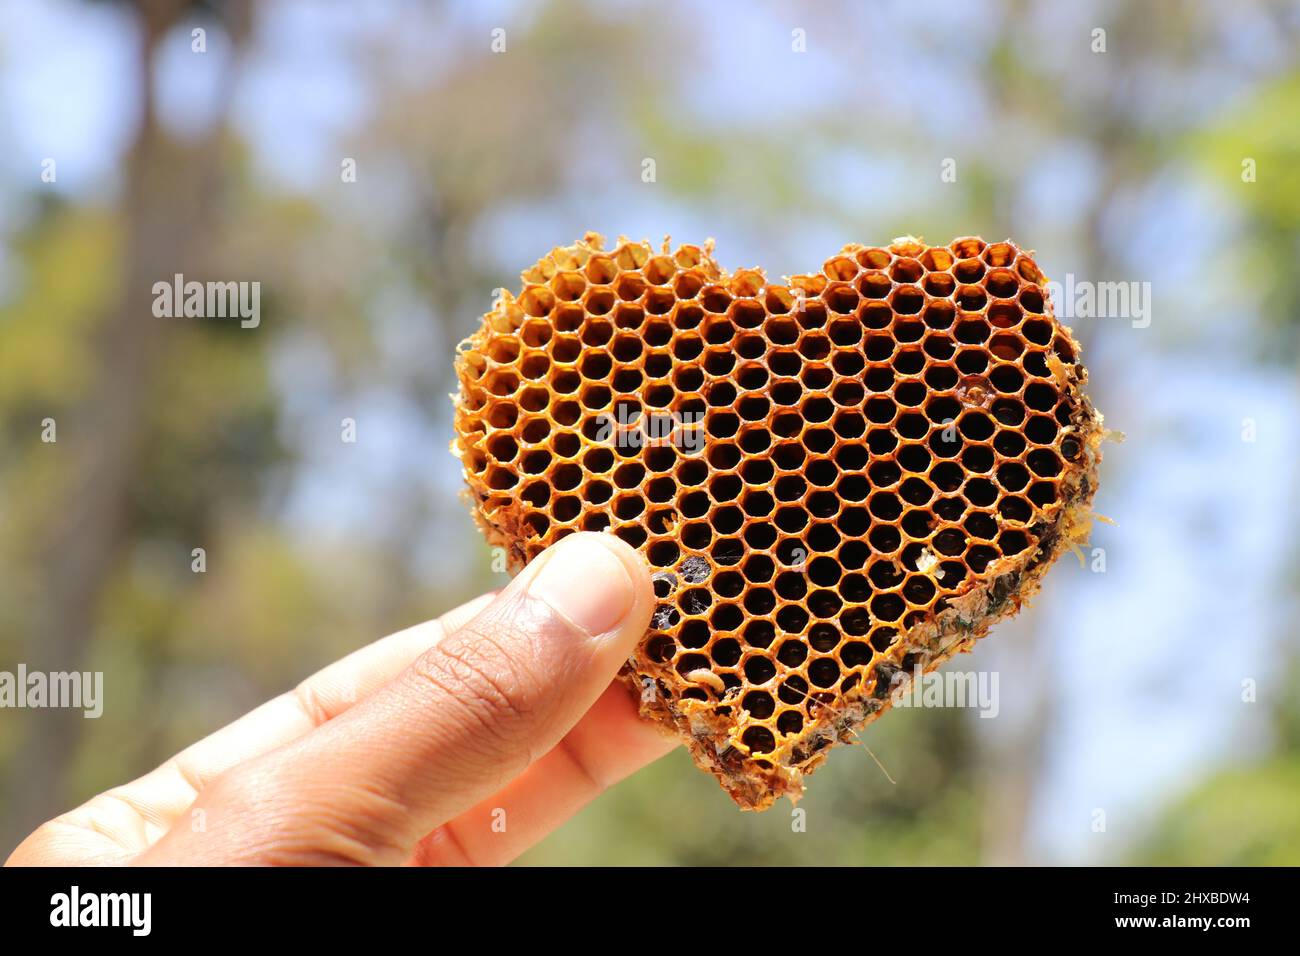 Heart shaped Honeycomb held in hand on daylight with nature background. Concept of sweetheart using honeycombs Stock Photo